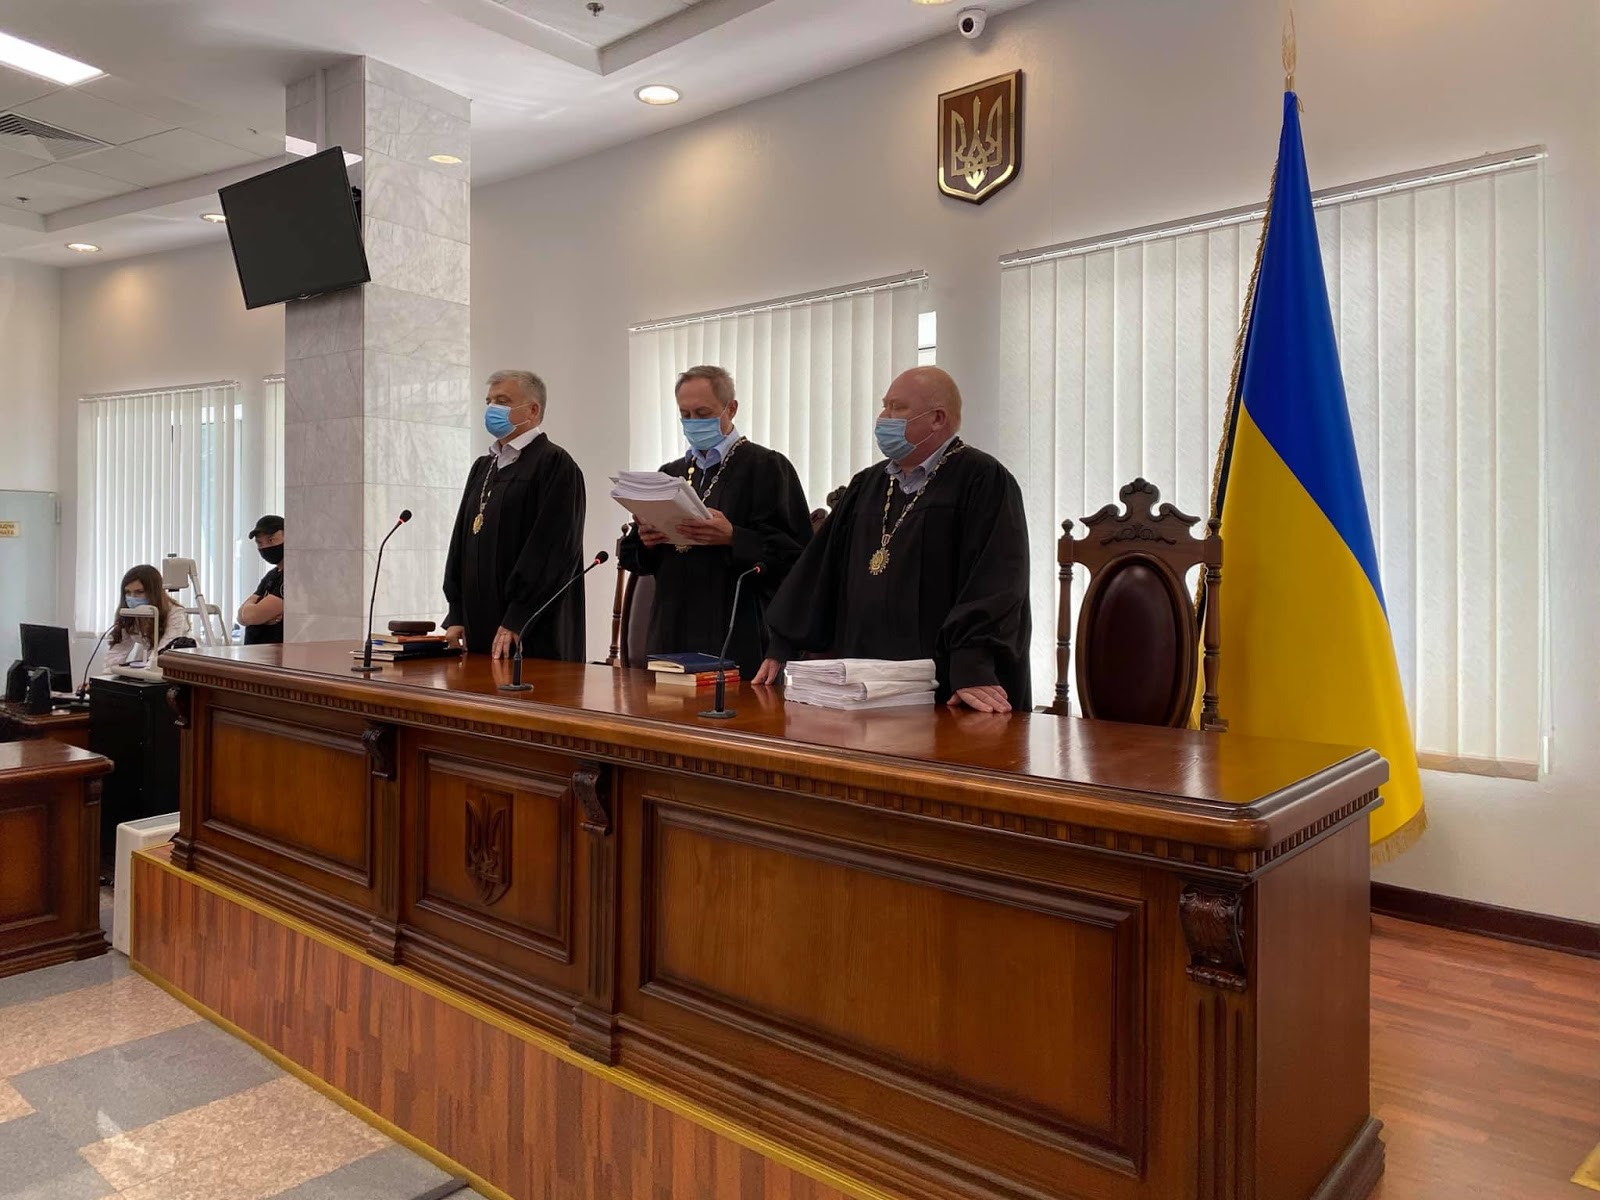 Corrupt and biased judges still pollute Ukraine’s judiciary; Zelenskyy’s reform will not fix this